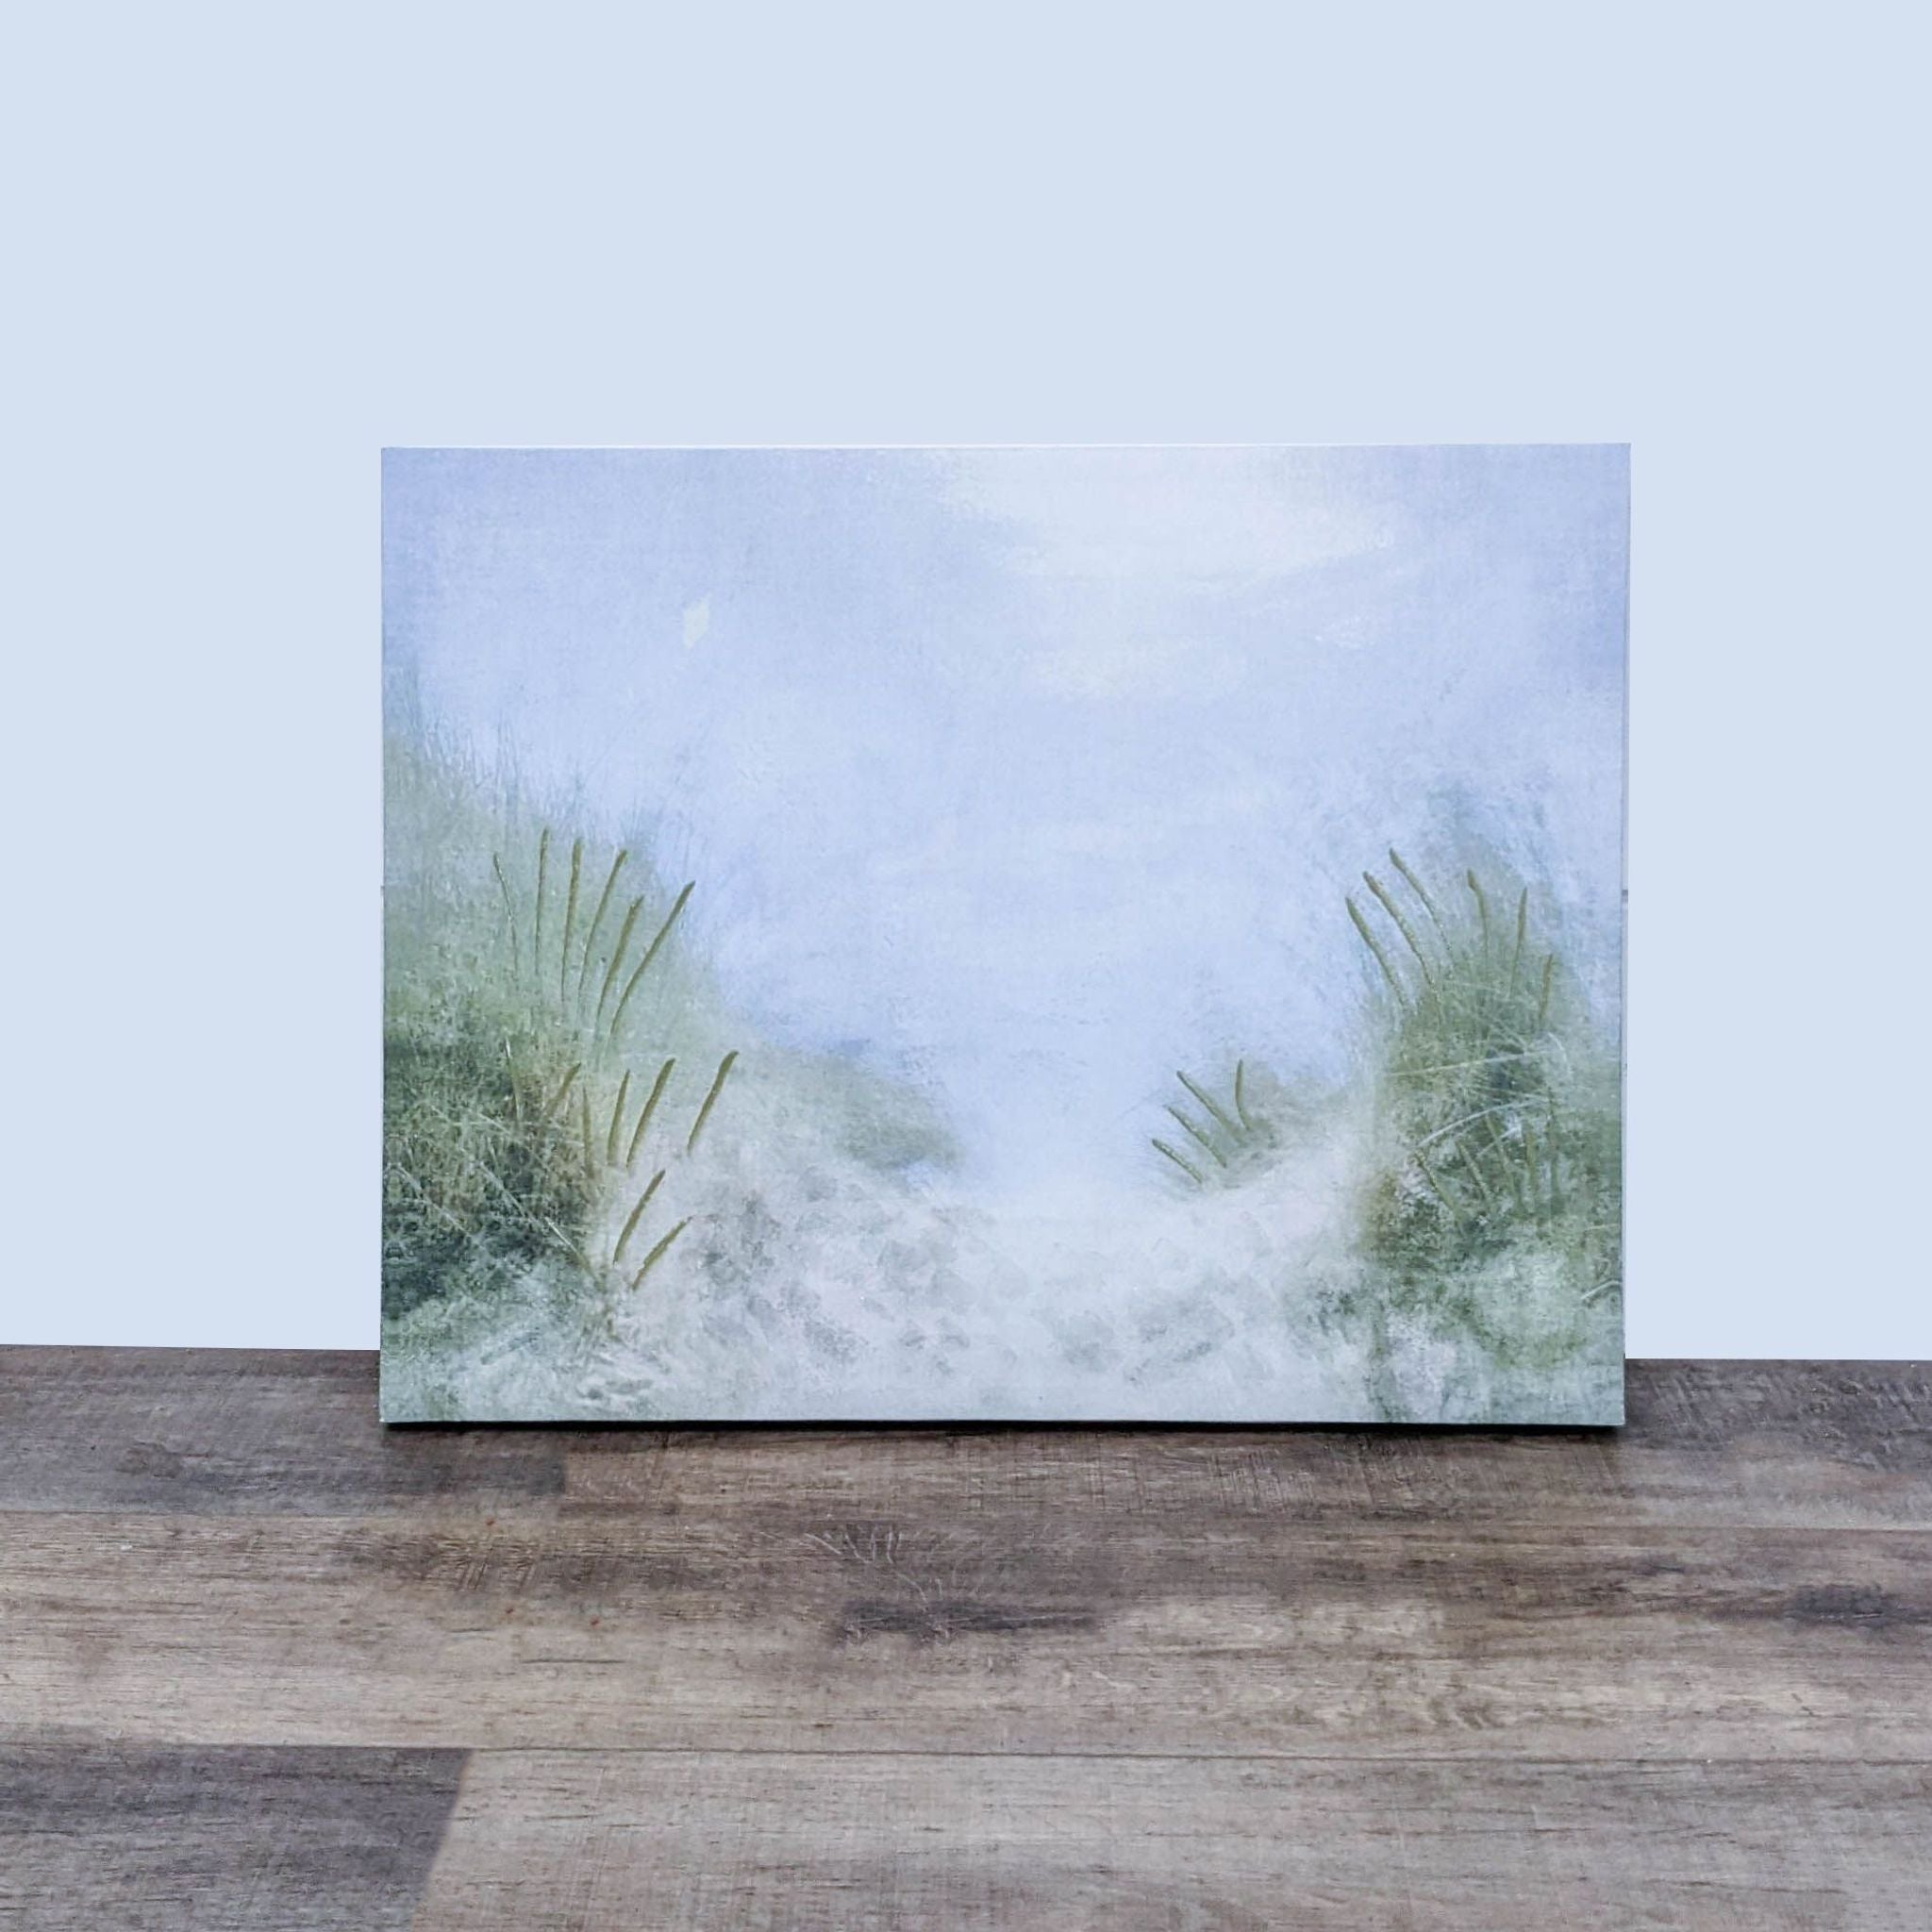 Alt text 1: Reperch giclee canvas print, featuring ethereal botanical motifs against a soft blue textured background, staged on a wooden floor.